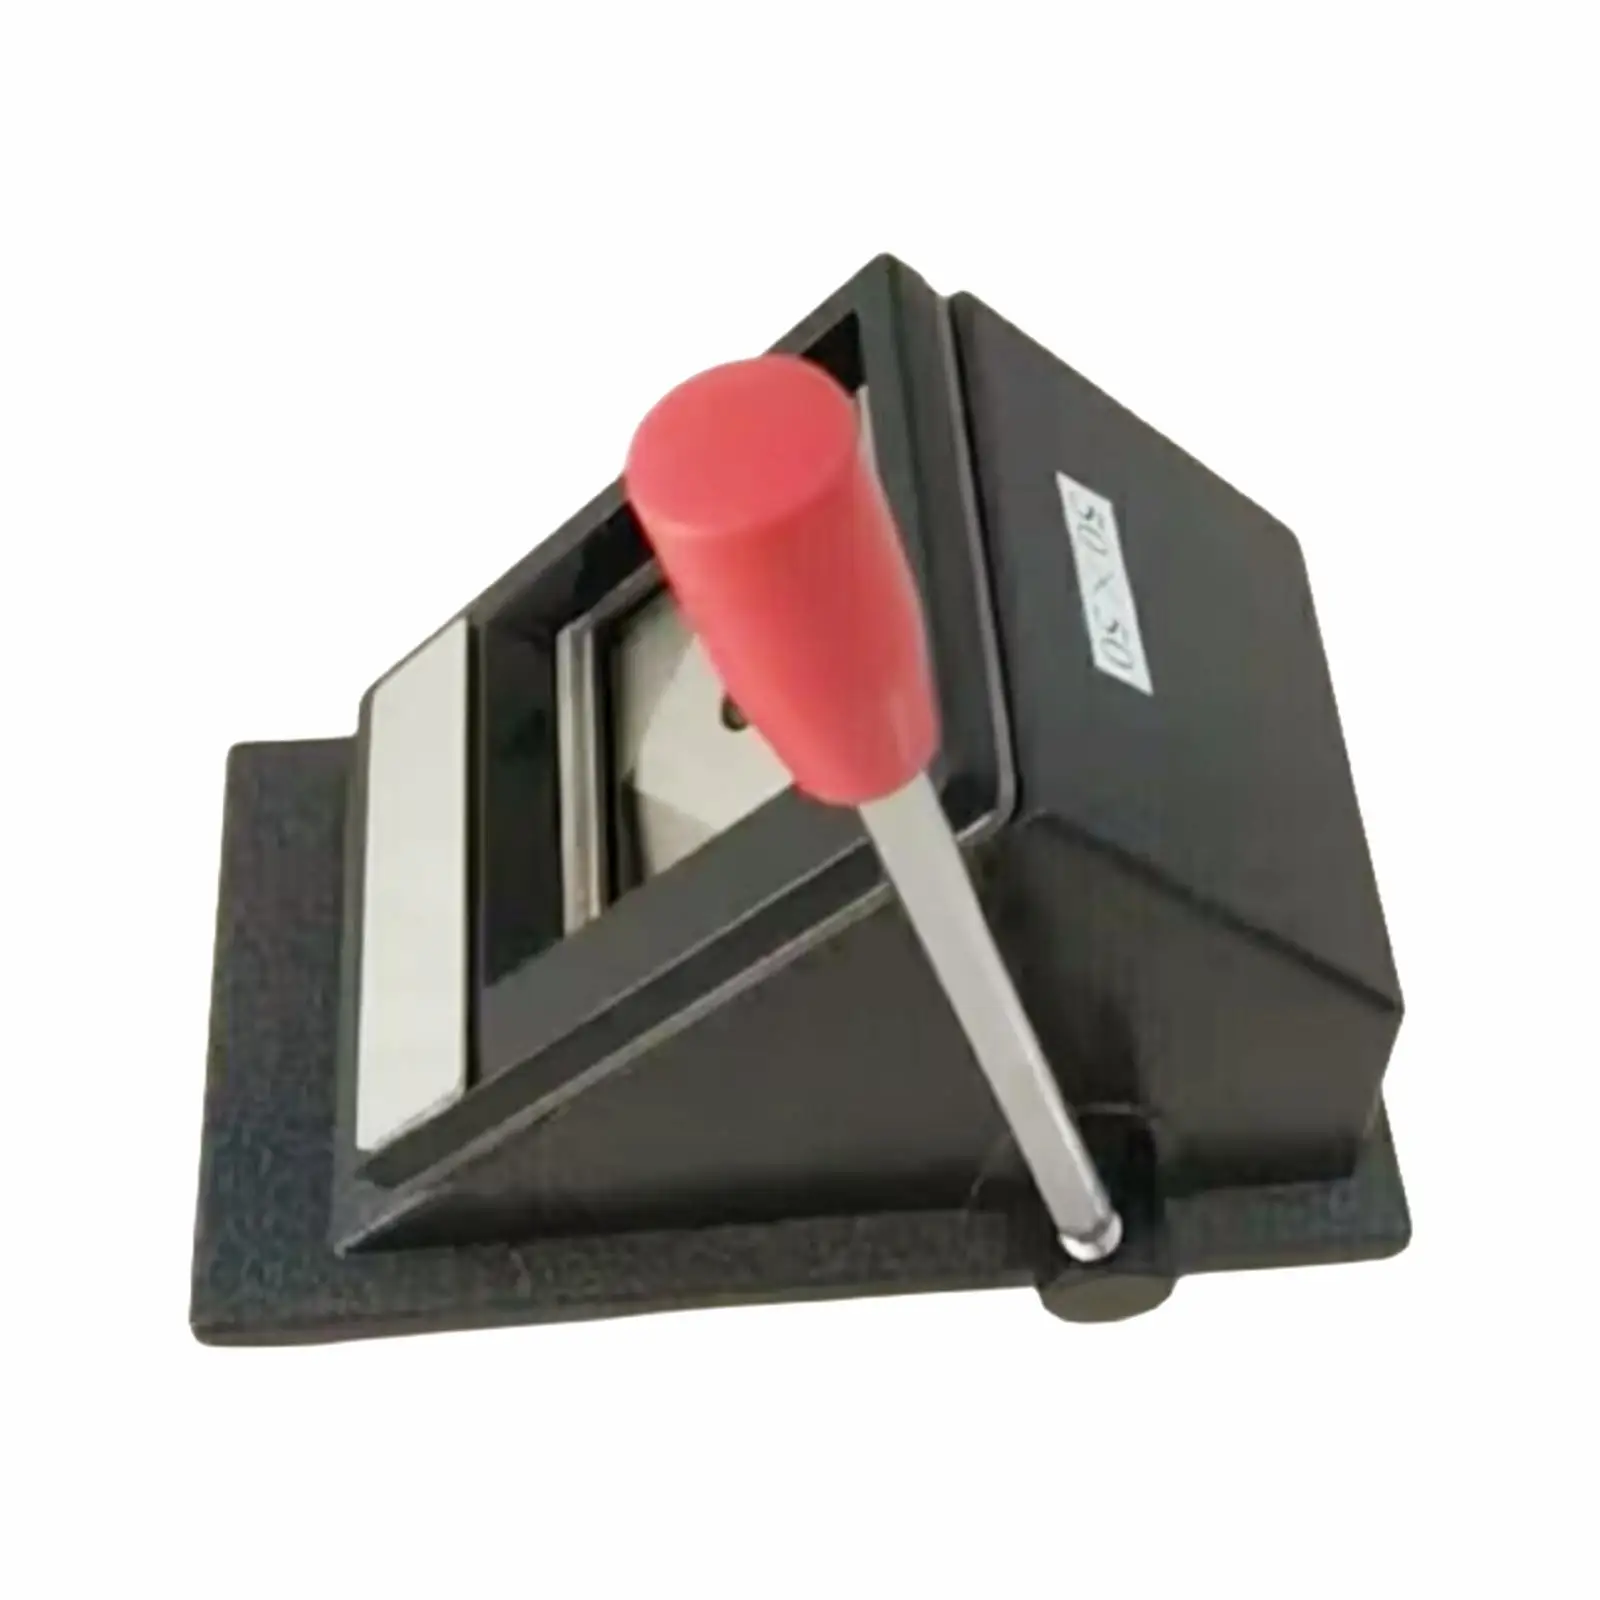 Passport Photo Cutter Metal Heavy Duty 2x2 Puncher Photo Punch Machine for Credit Card Card Making Scrapbooking ID Paper Trimmer